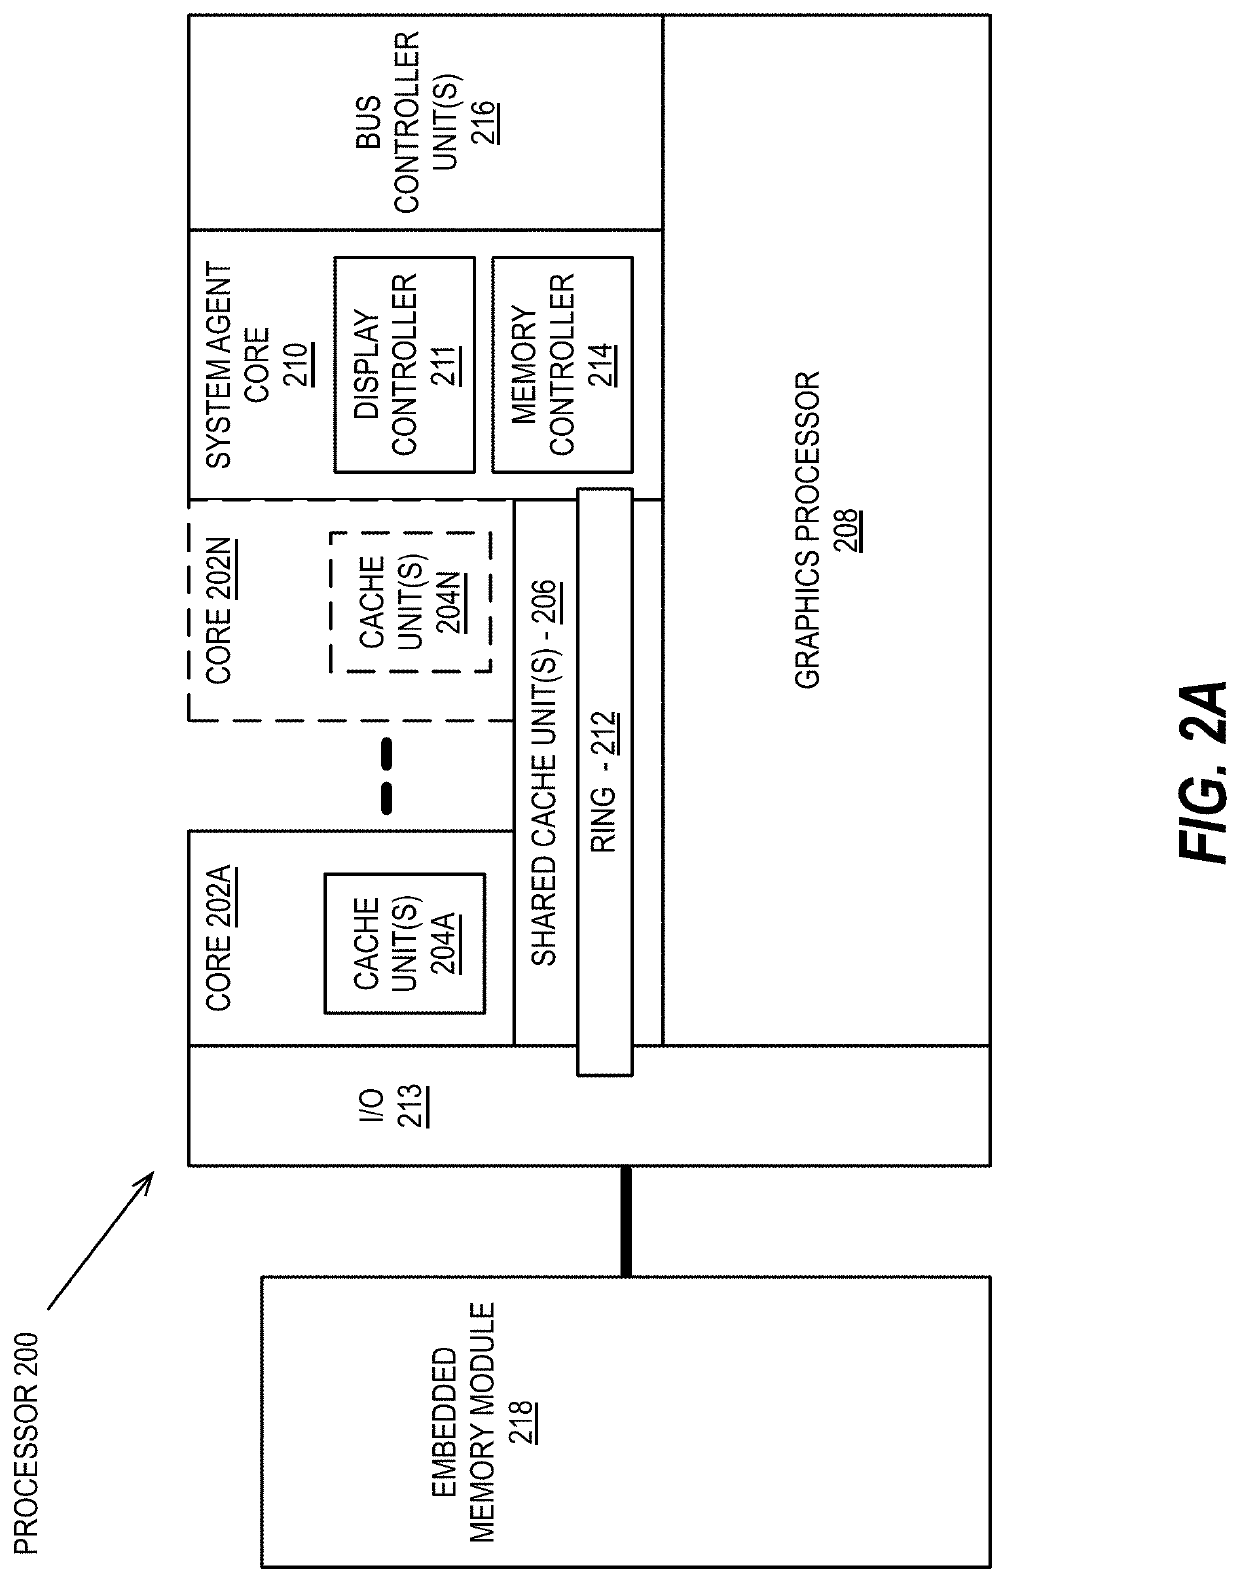 Apparatus and method for compressing ray tracing acceleration structure build data